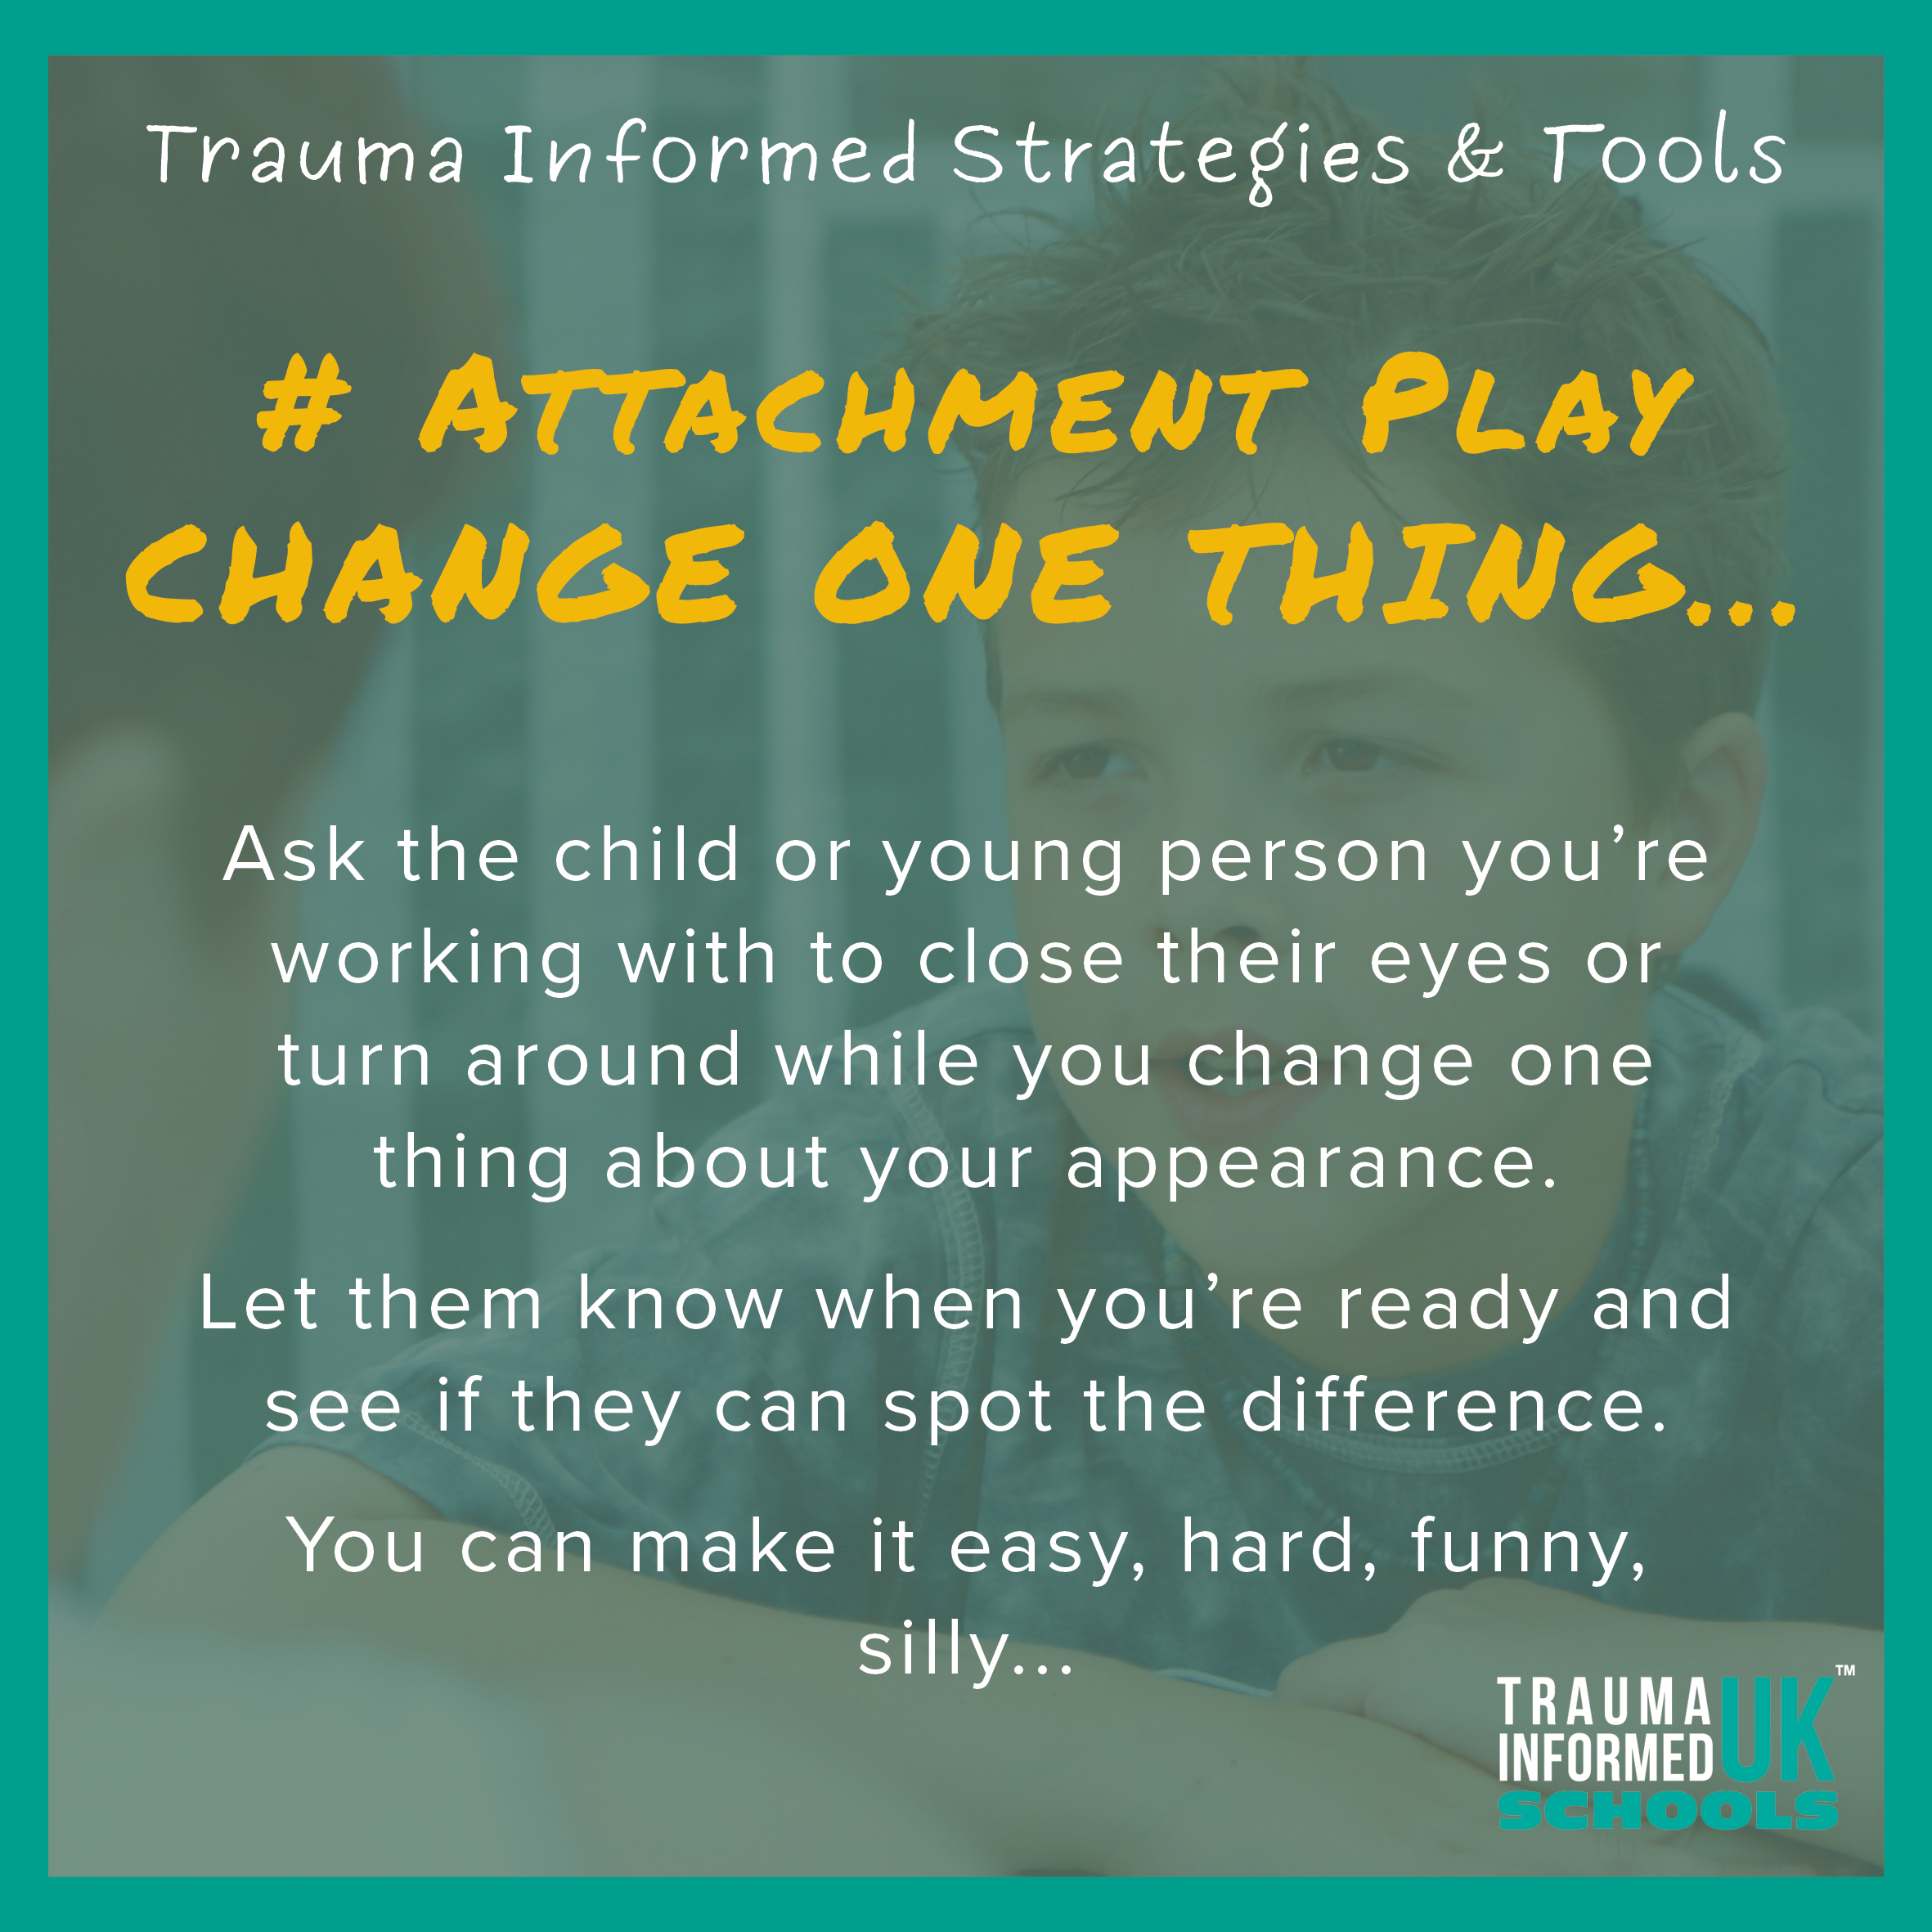 Attachment Play Change One Thing